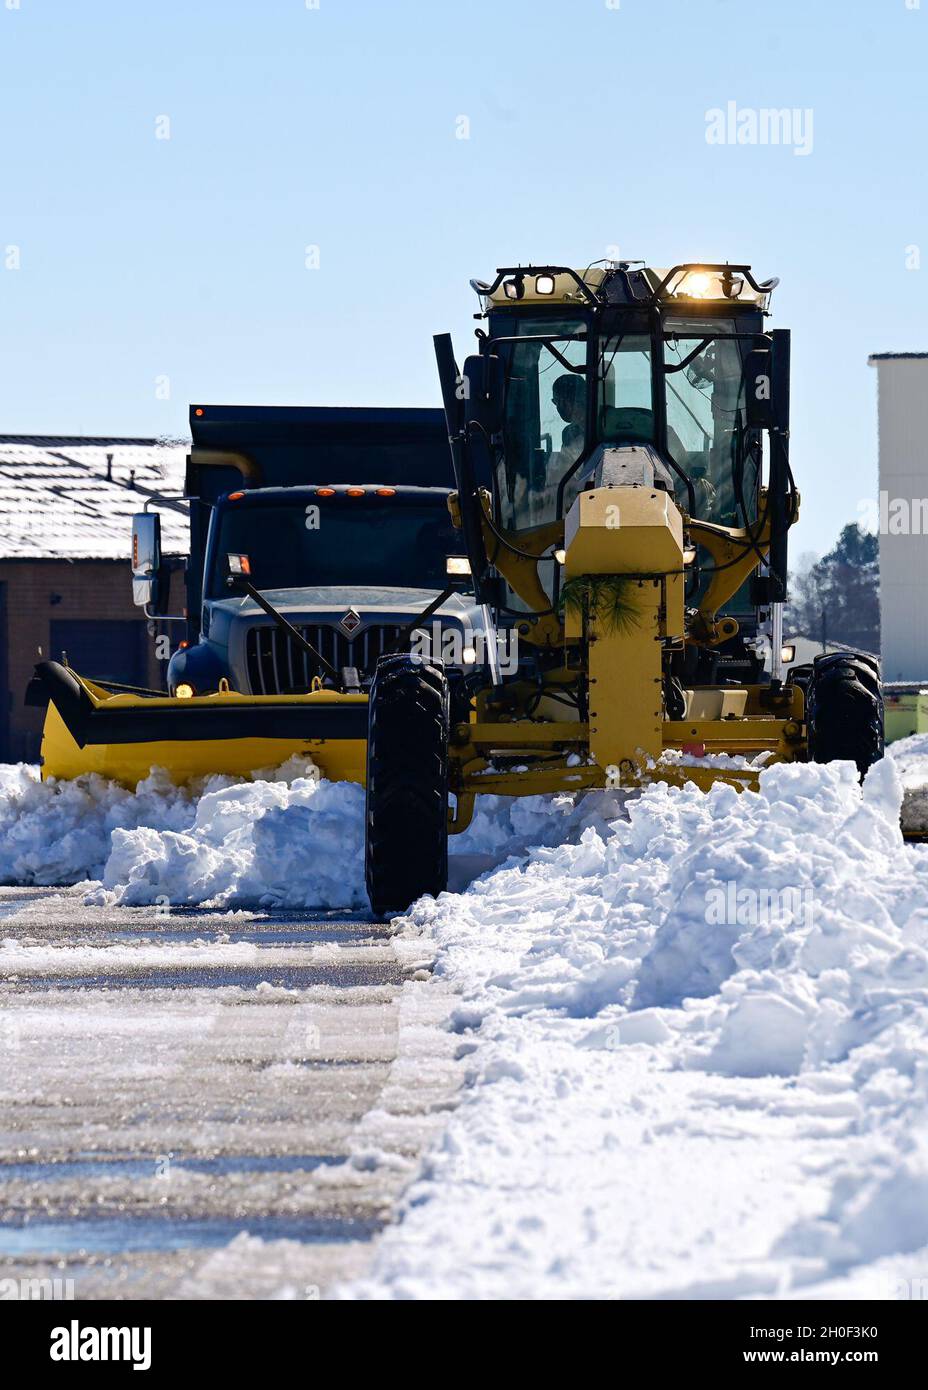 Airmen Assigned To The 19th Civil Engineer Squadron Plow Snow From The Flightline At Little Rock Air Force Base Arkansas Feb 21 The Little Rock Area Received Record Breaking Snowfall From A